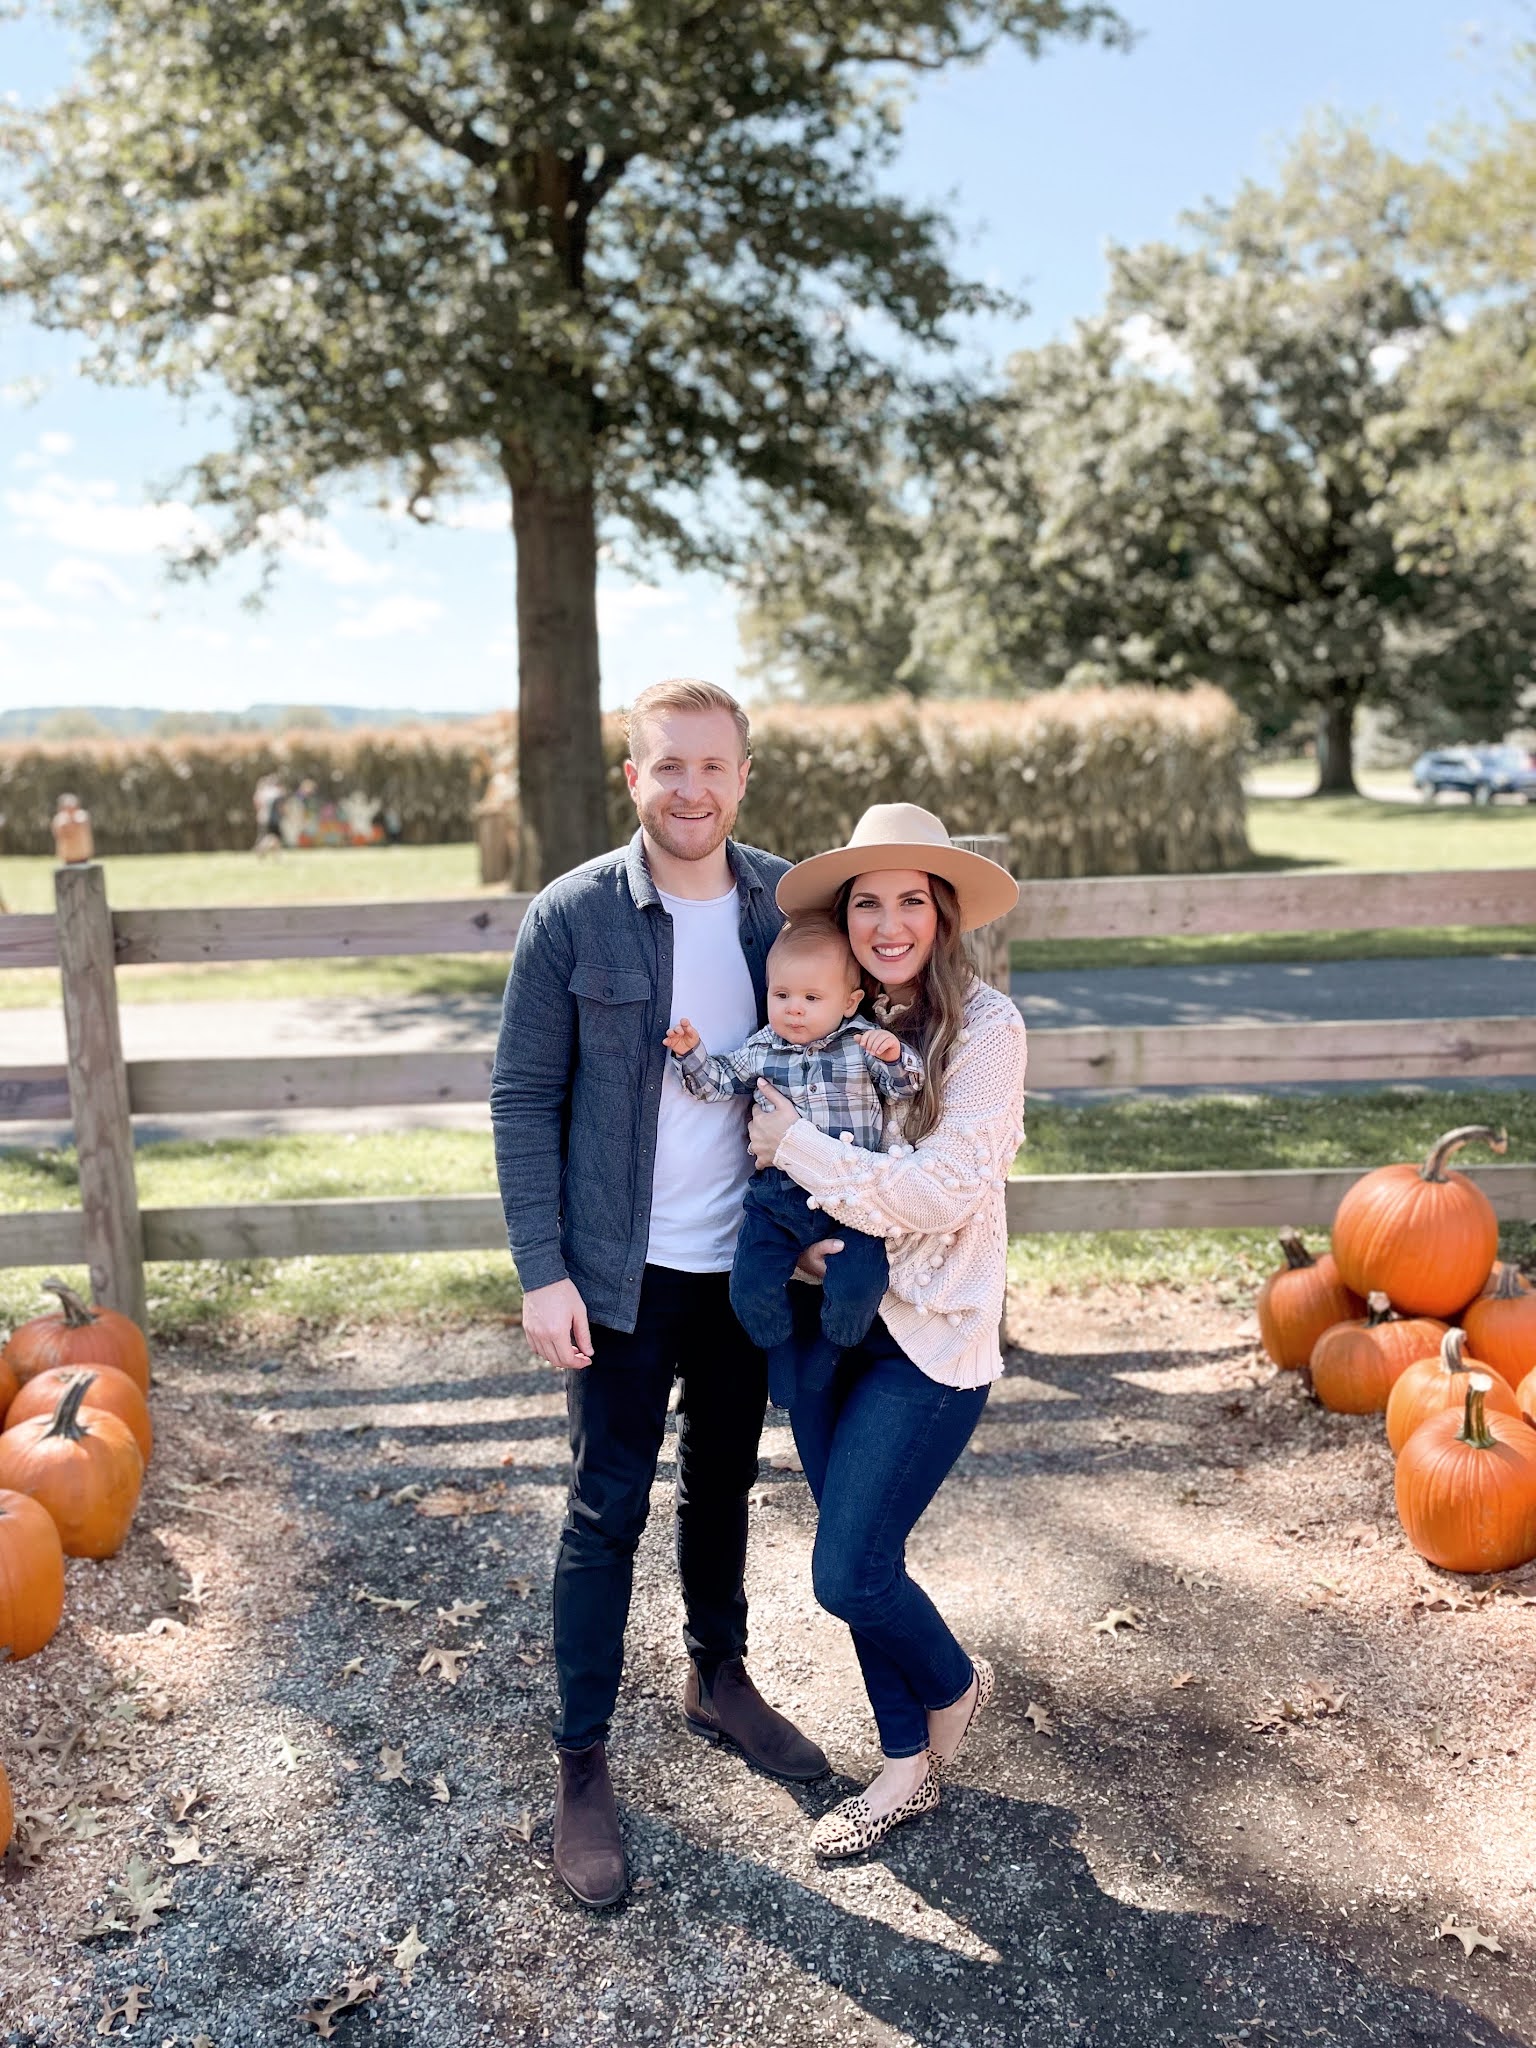 PUMPKIN PATCH & FARM FAMILY OUTFIT INSPIRATION | A Classy Fashionista